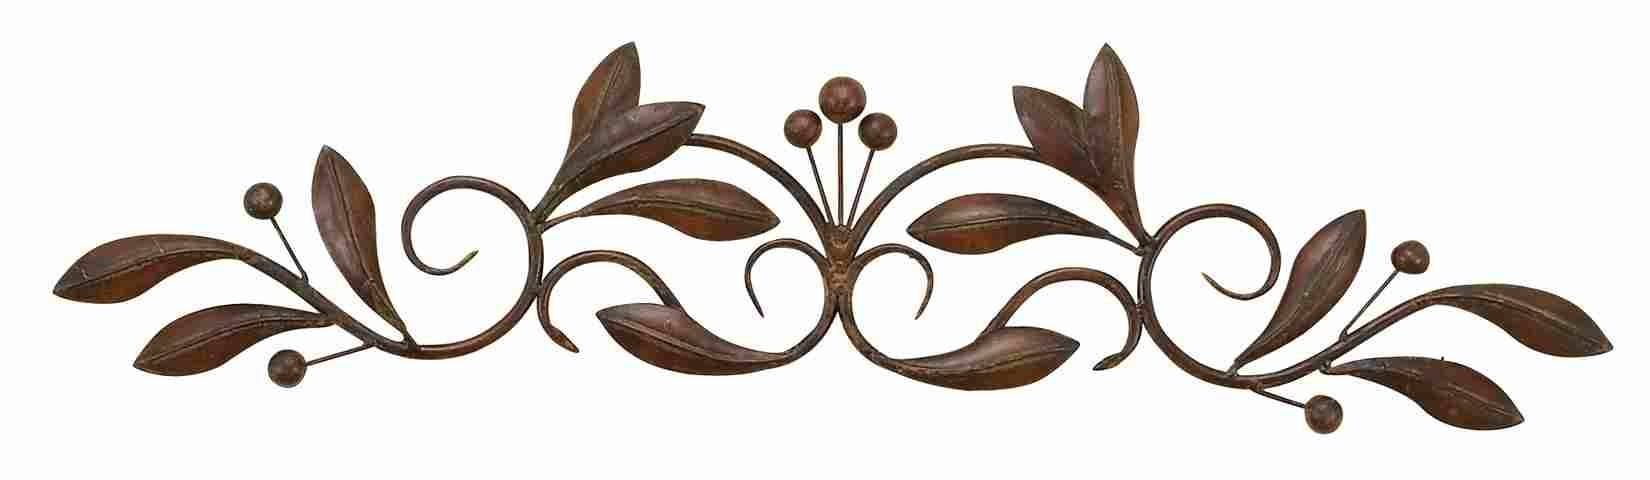 Small Buds & Vines – Metal Wall Art Scroll Within Most Current Small Metal Wall Art Decor (View 1 of 20)